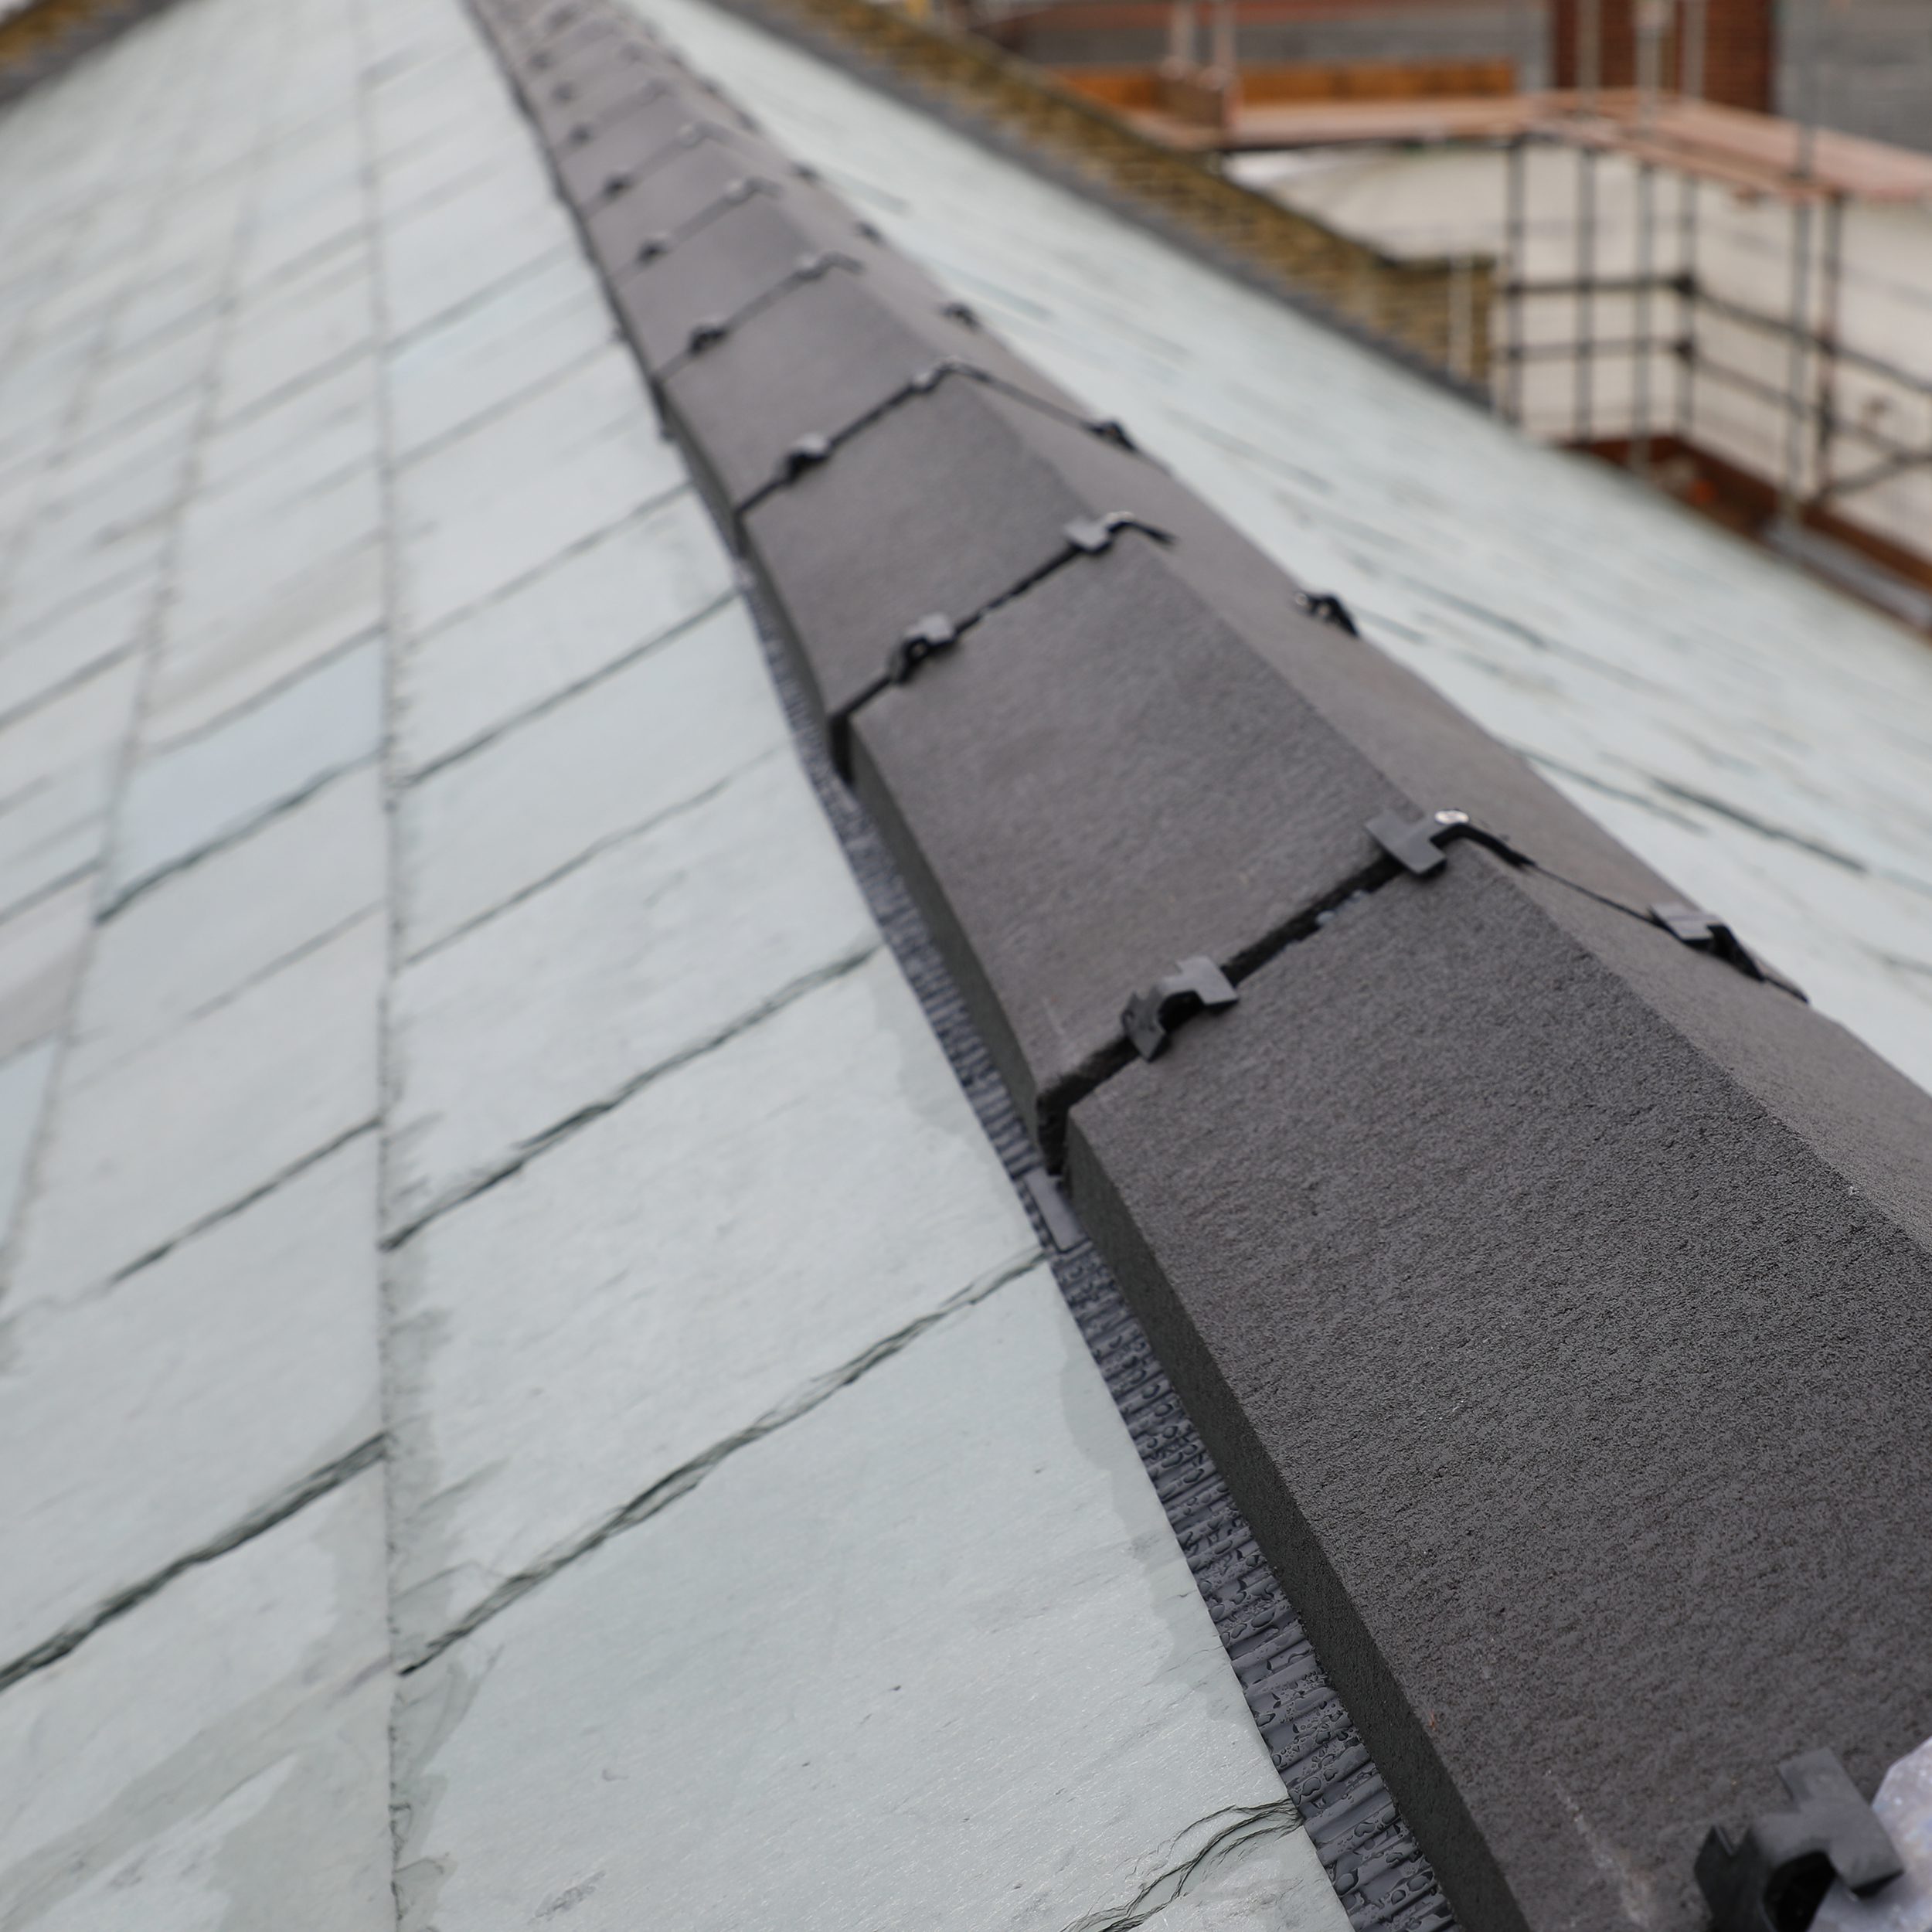 Bromley town hall roof showing the recent roofing works carried out by axis